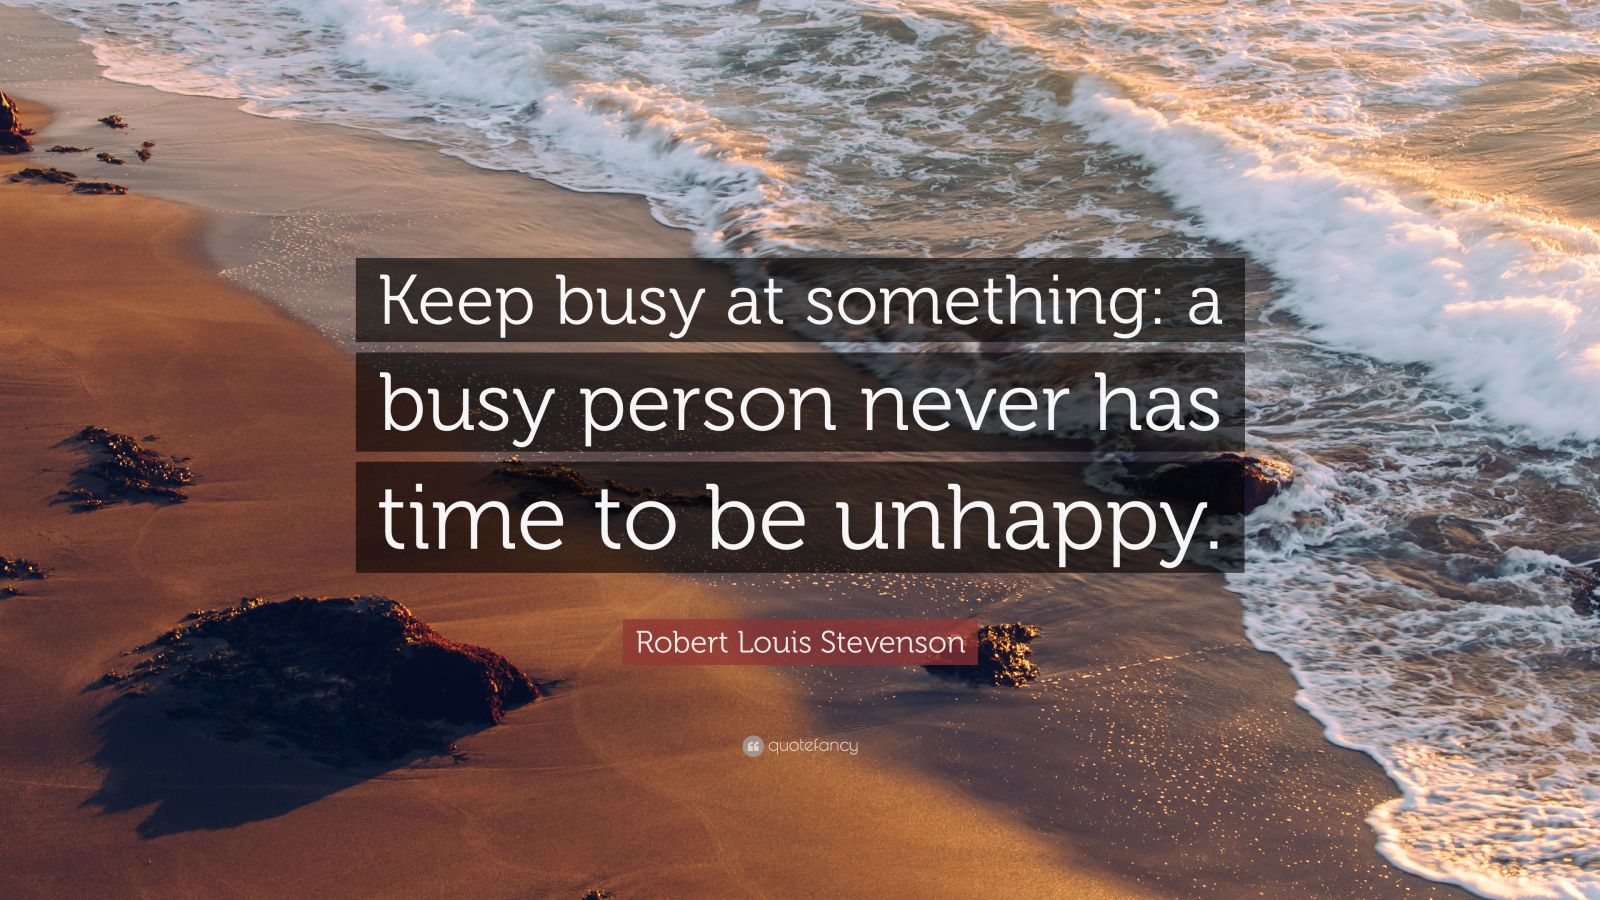 robert-louis-stevenson-quote-keep-busy-at-something-a-busy-person-never-has-time-to-be